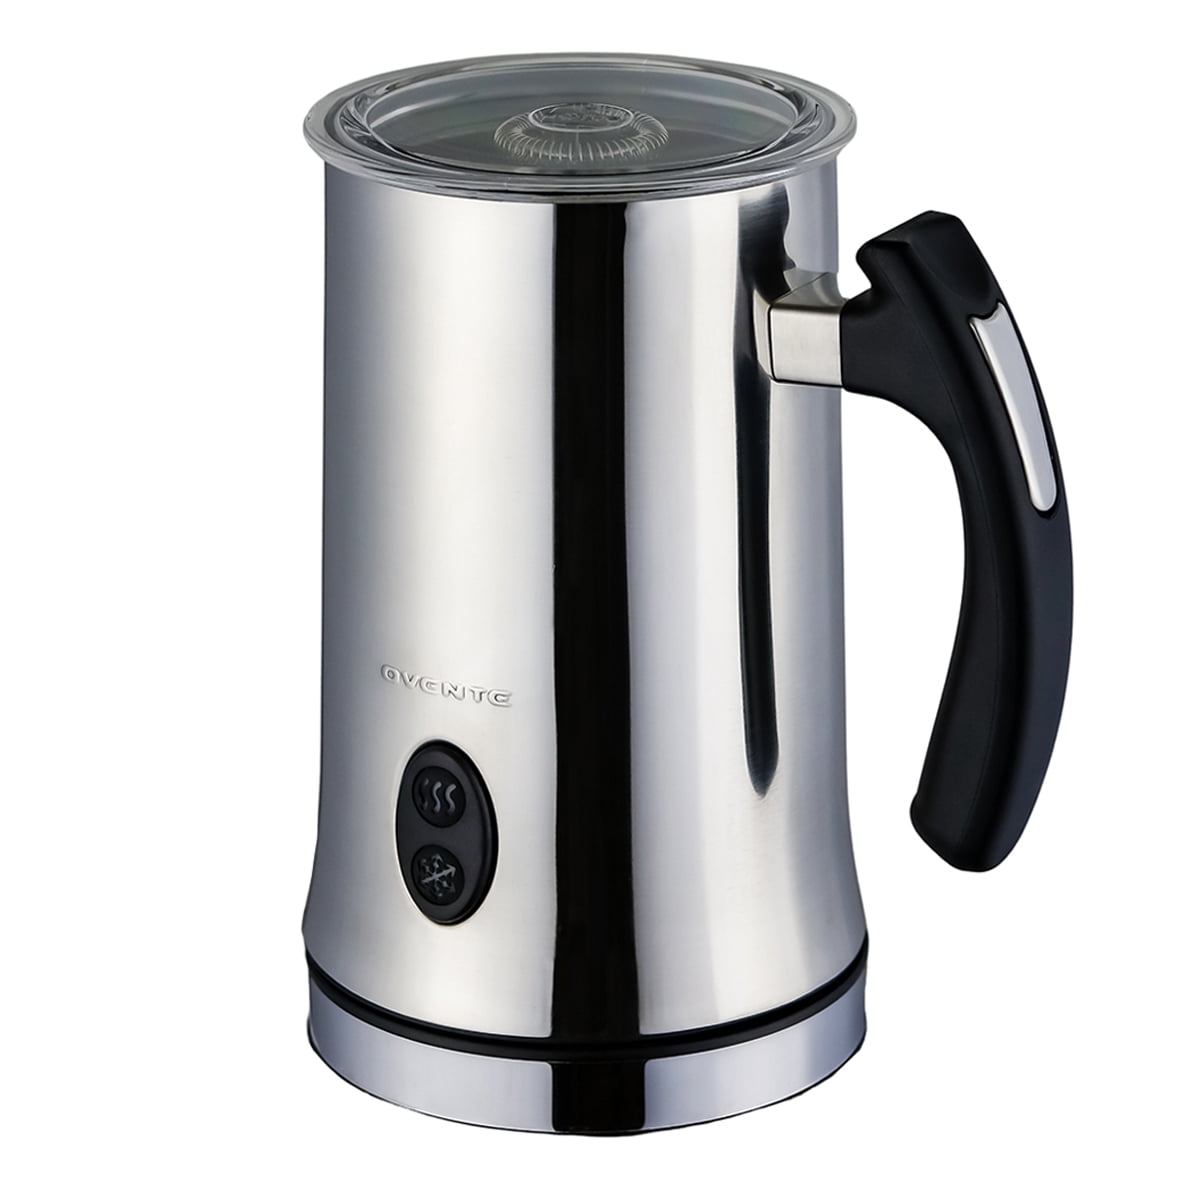 Ovente Electric Milk Frother with Stainless Steel Nonstick Carafe, Portable  Compact Milk Warmer Automatic Hot or Cold Foamer and Steamer for Coffee  Latte Cappuccino Hot Chocolate, Black FR1208B 